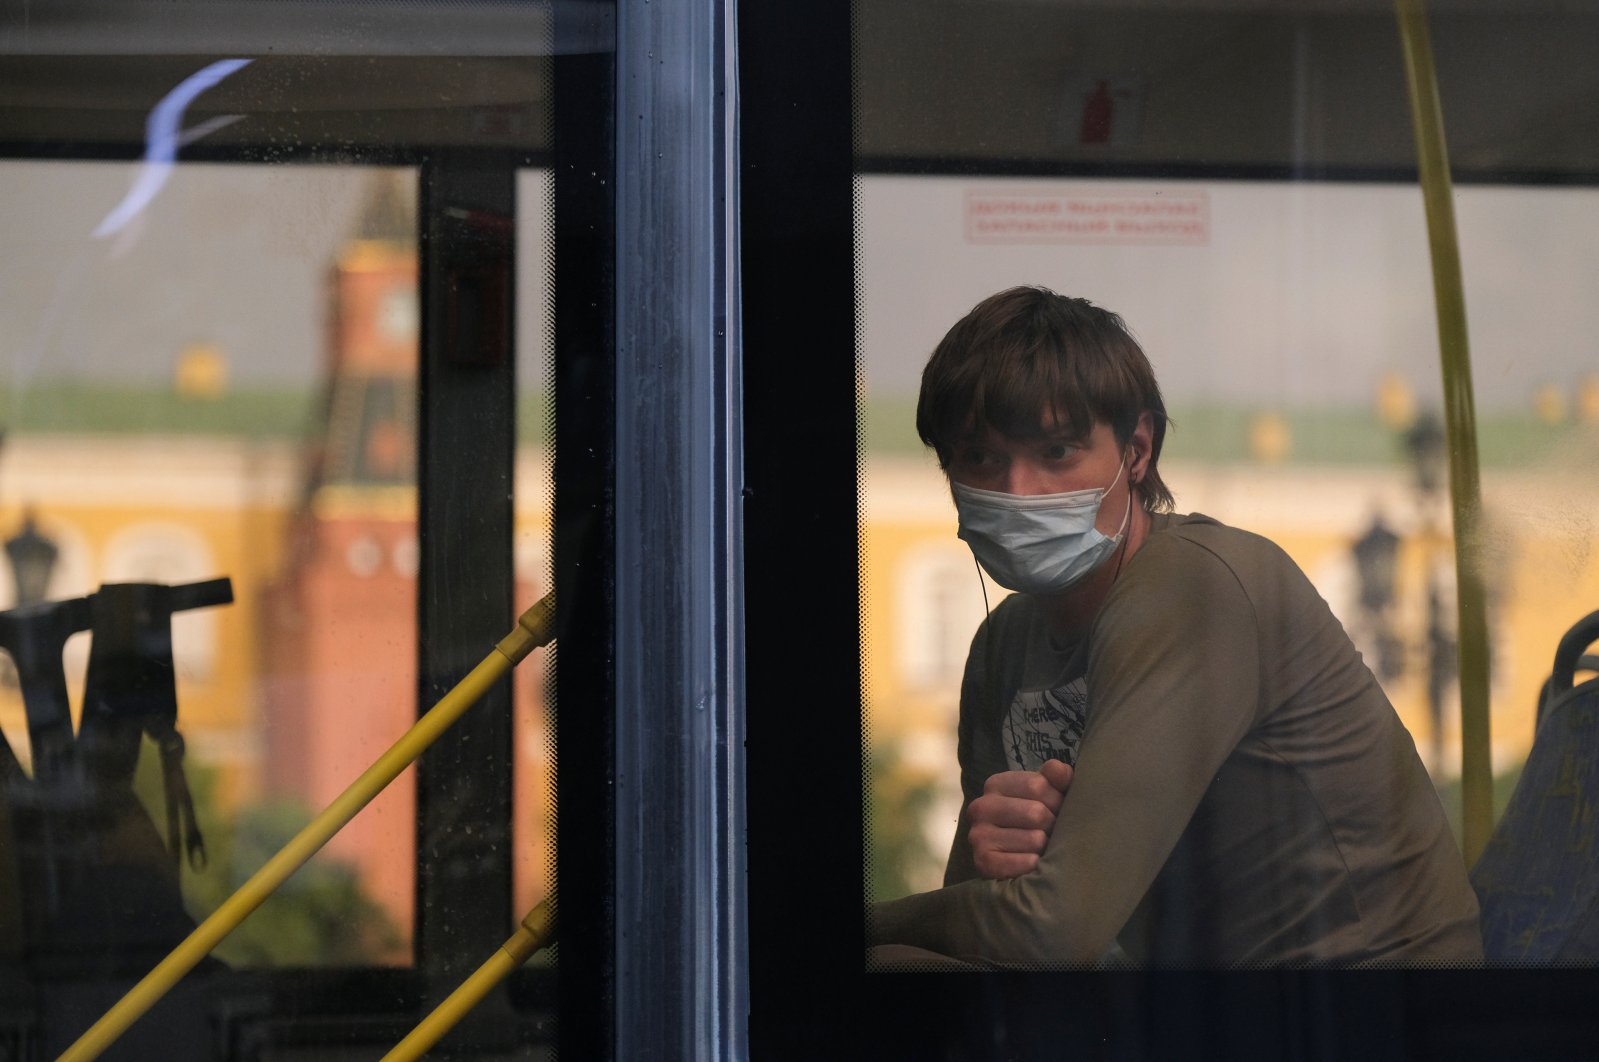 A passenger wearing a protective face mask as a preventive measure against COVID-19 looks through a bus window in Moscow, Russia, June 19, 2020. (REUTERS Photo)